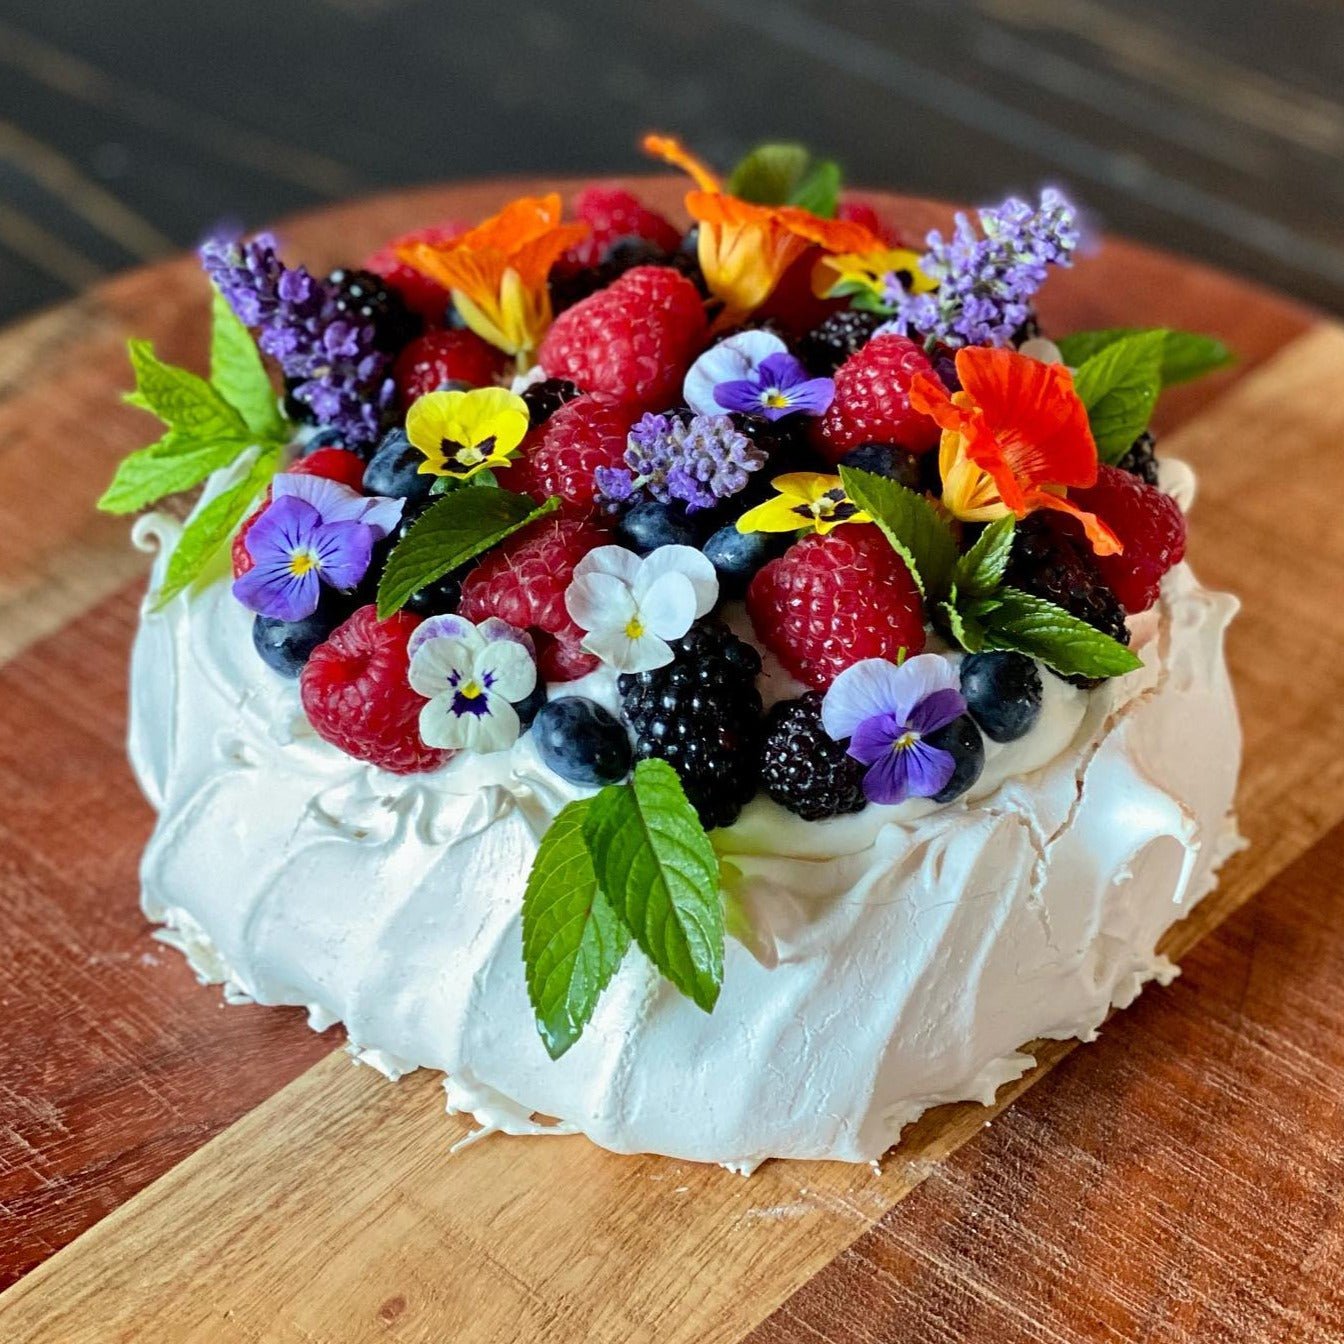 20+ Edible Flower Cakes to Enjoy the Beautiful Sight and Taste of